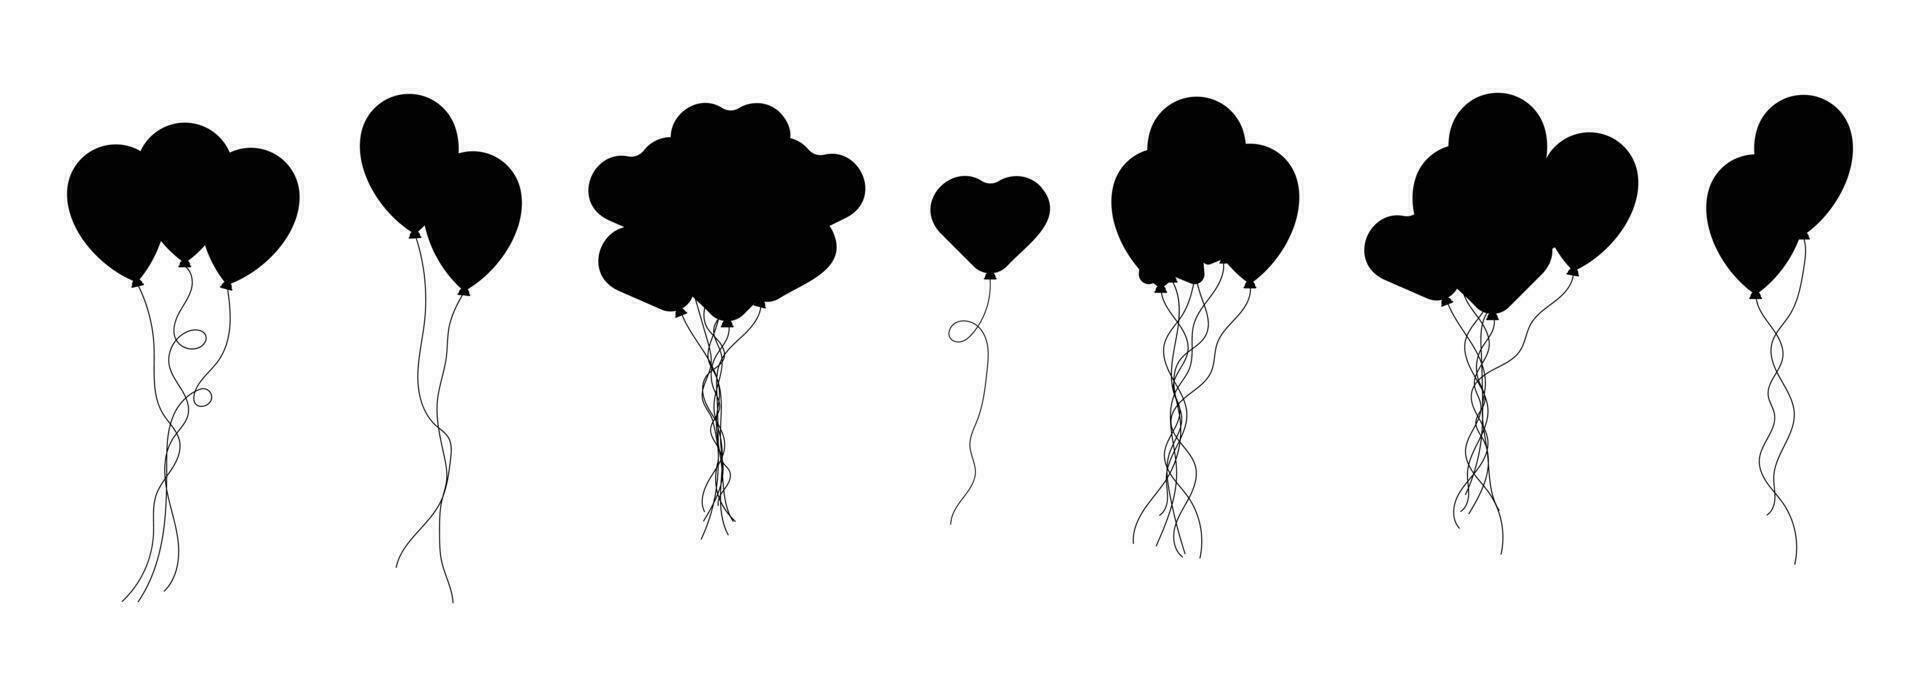 Balloons bunch silhouette in cartoon style vector illustration isolated on white